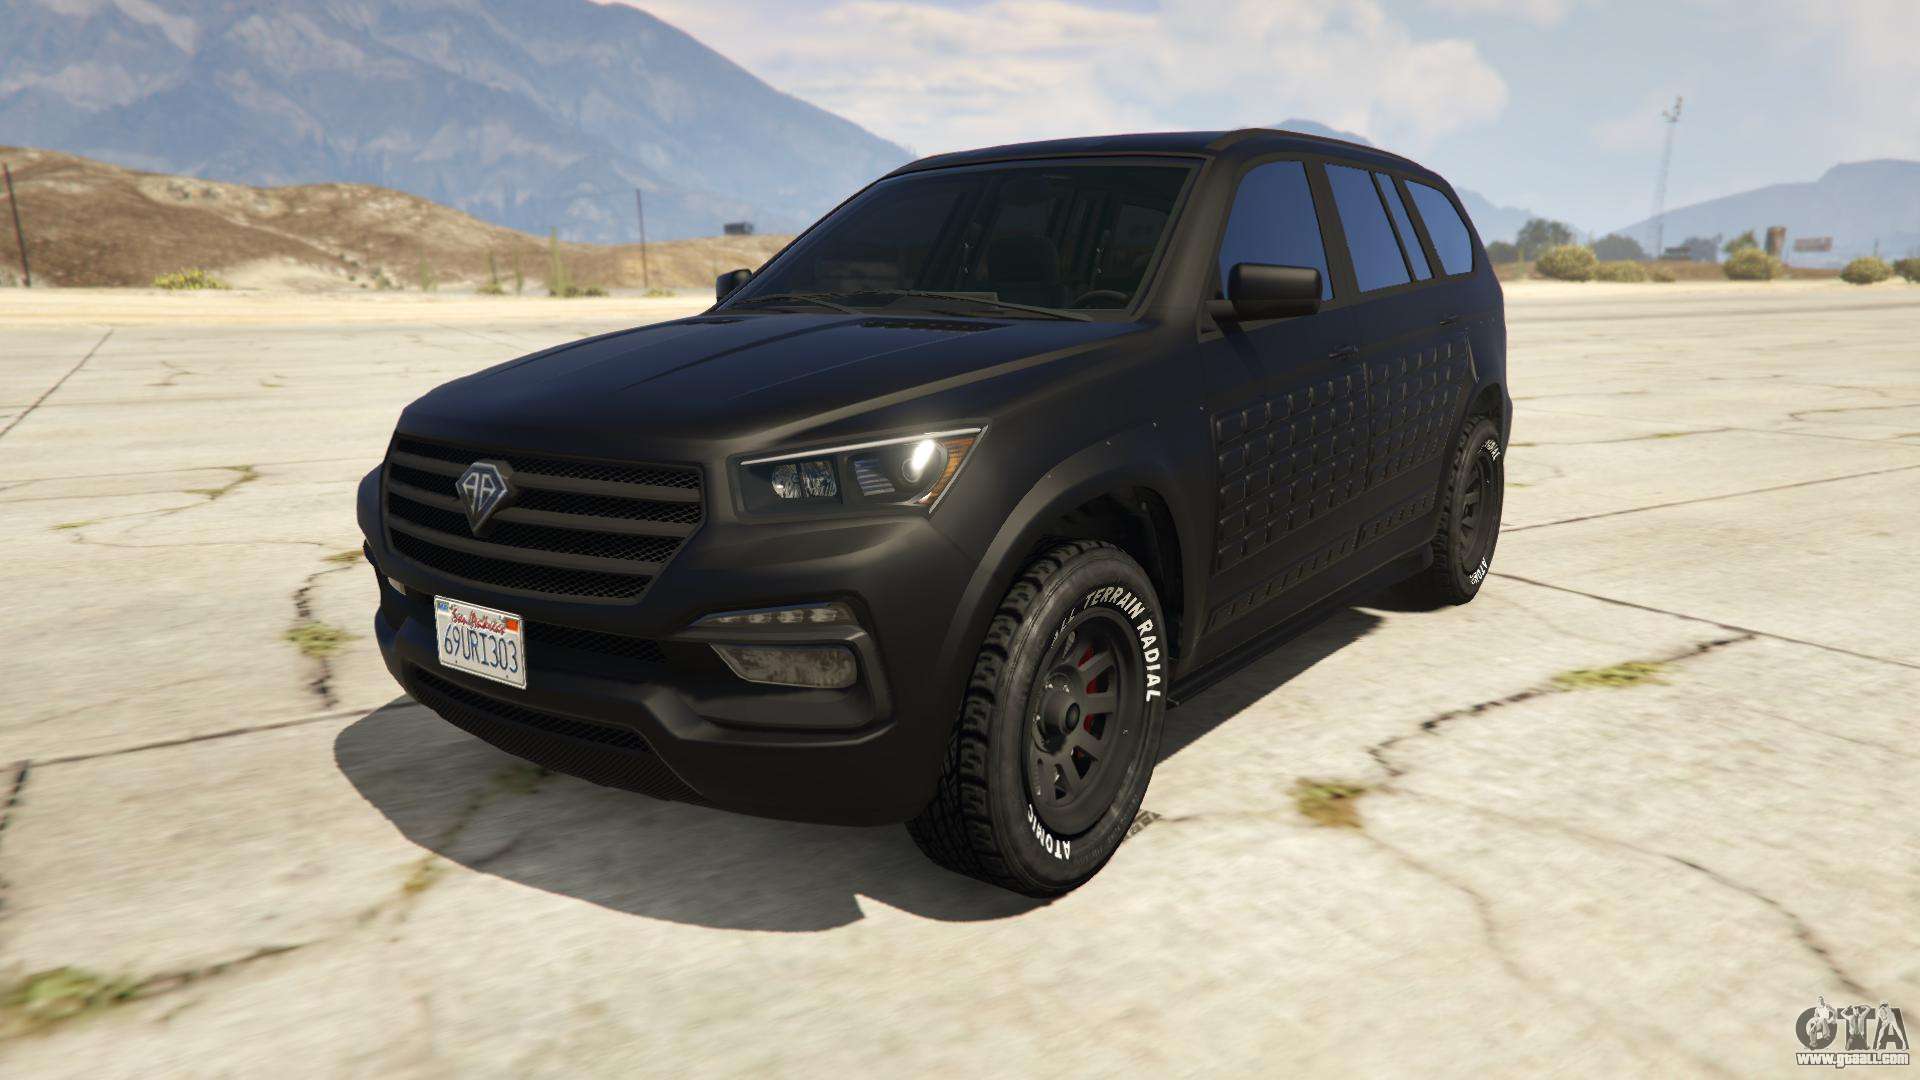 XLS Benefactor (Armored) from GTA Online - front view